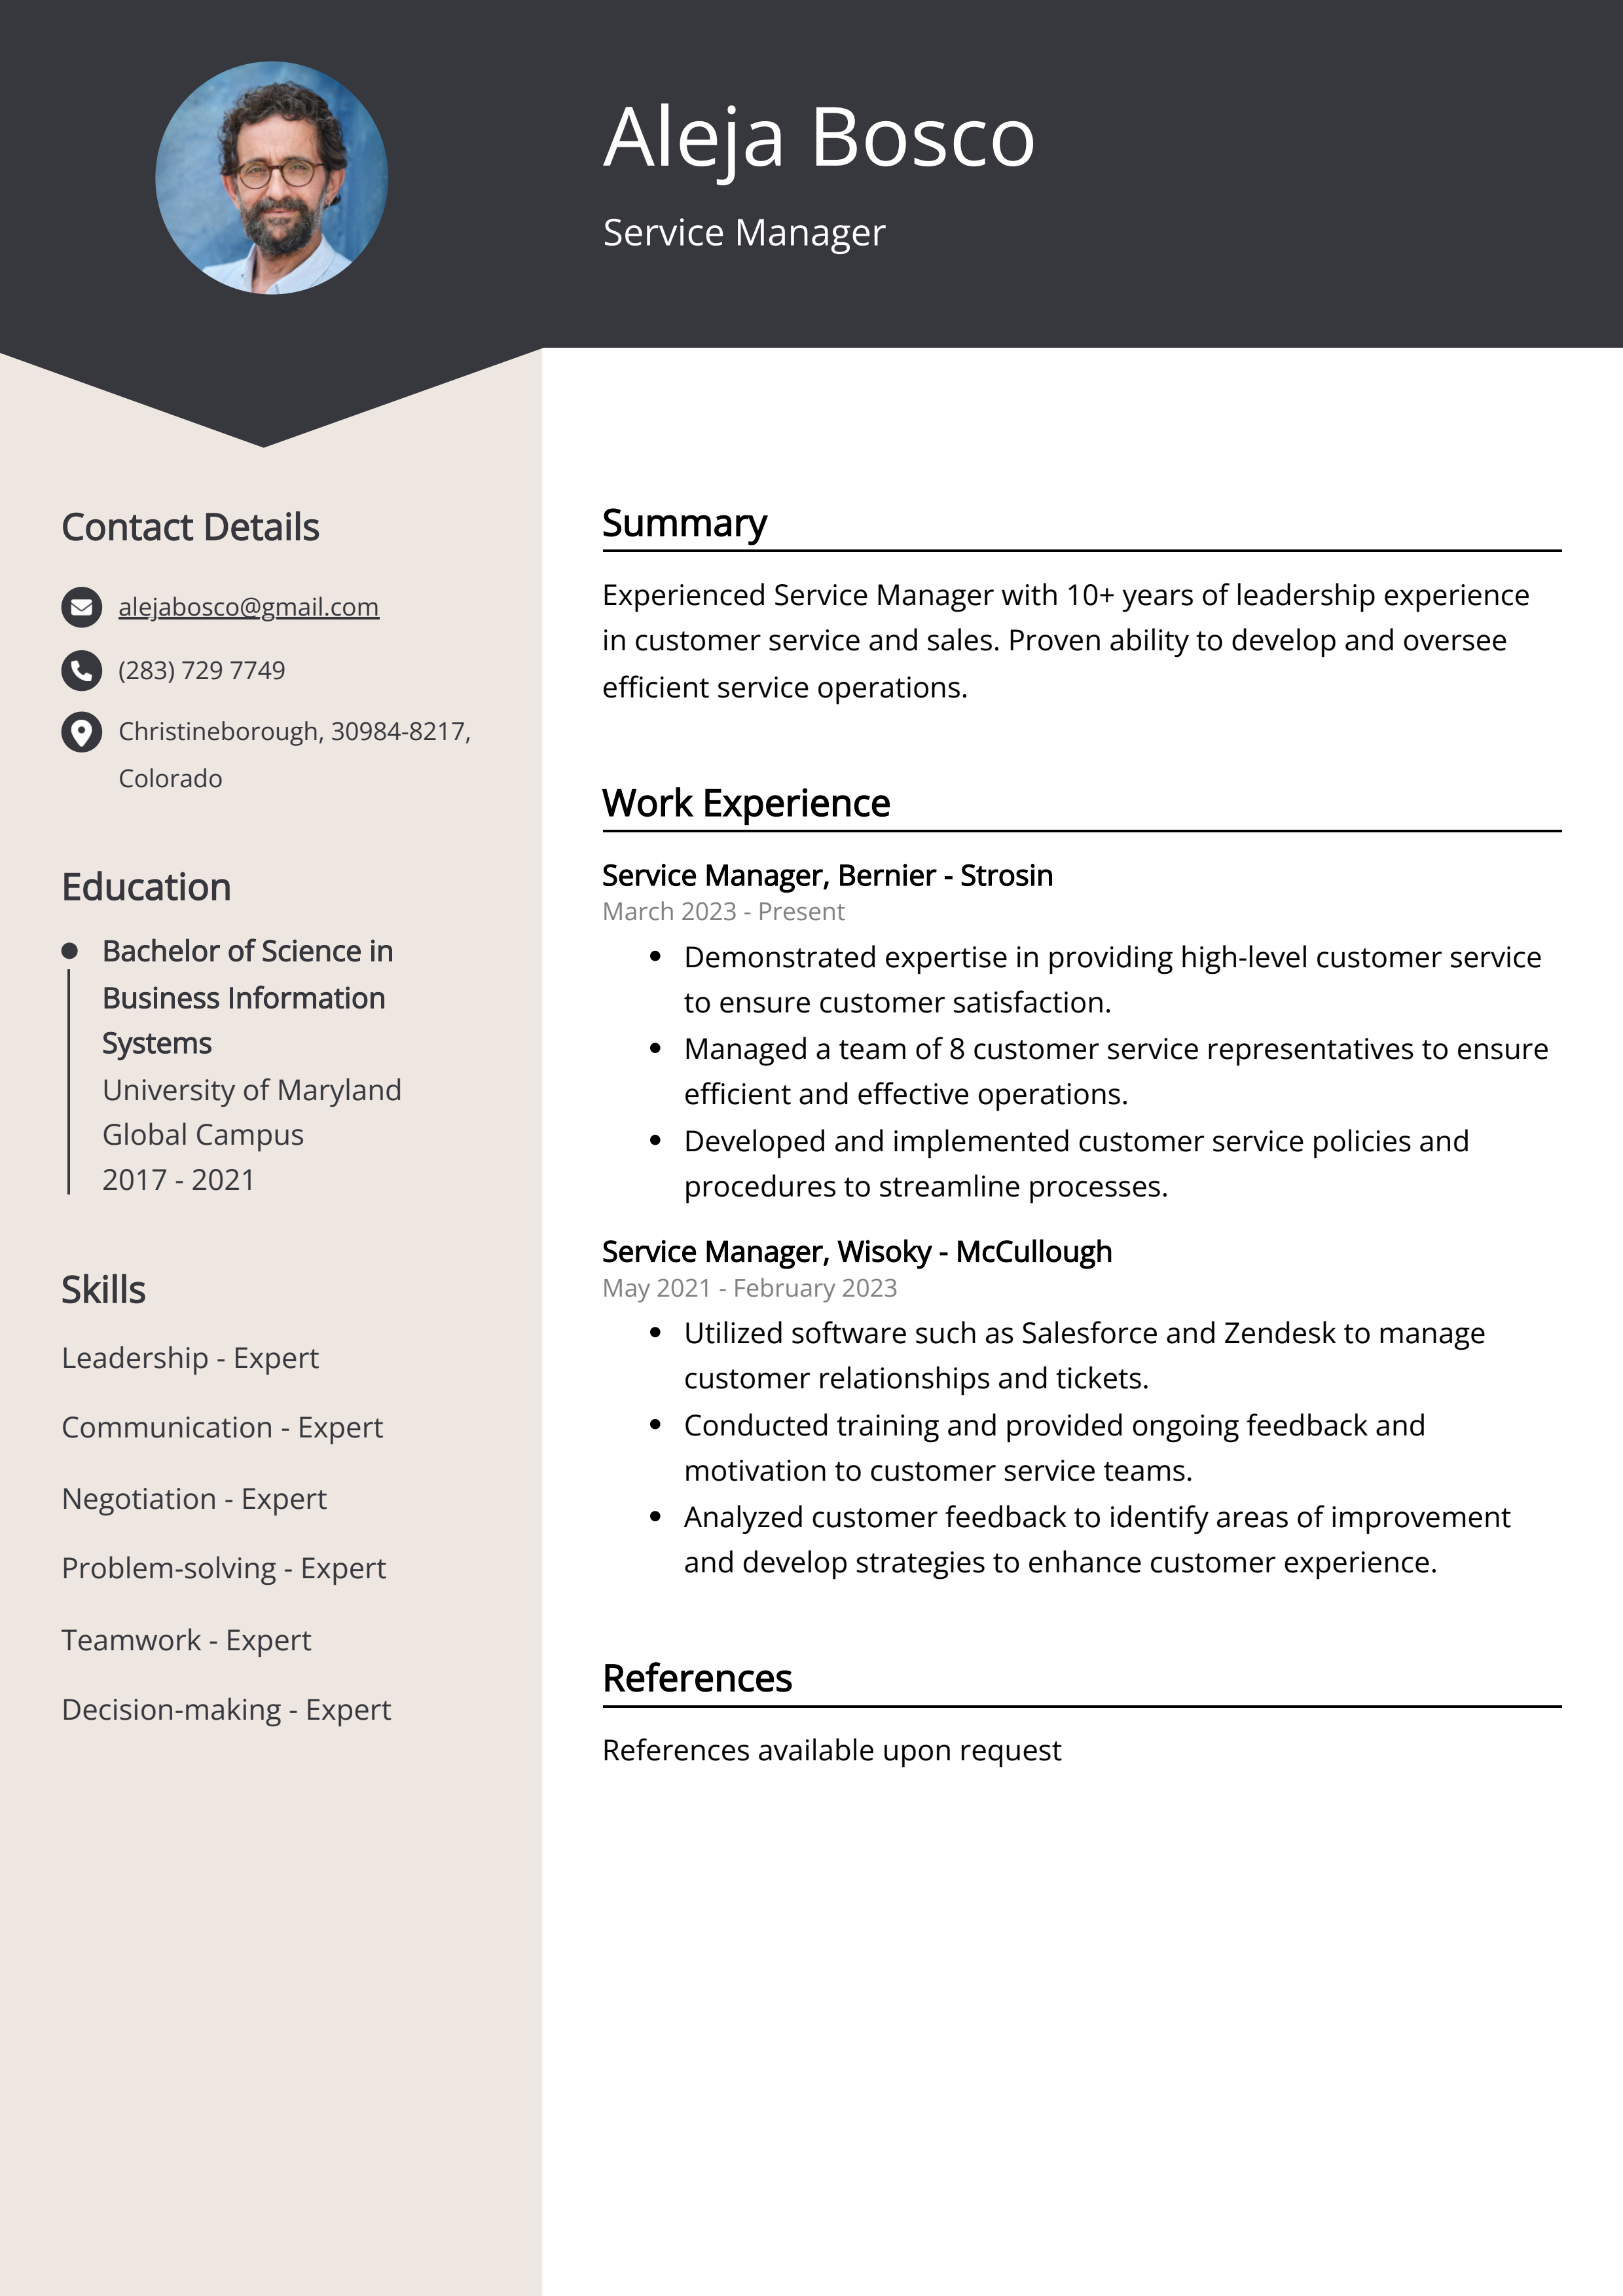 Service Manager CV Example